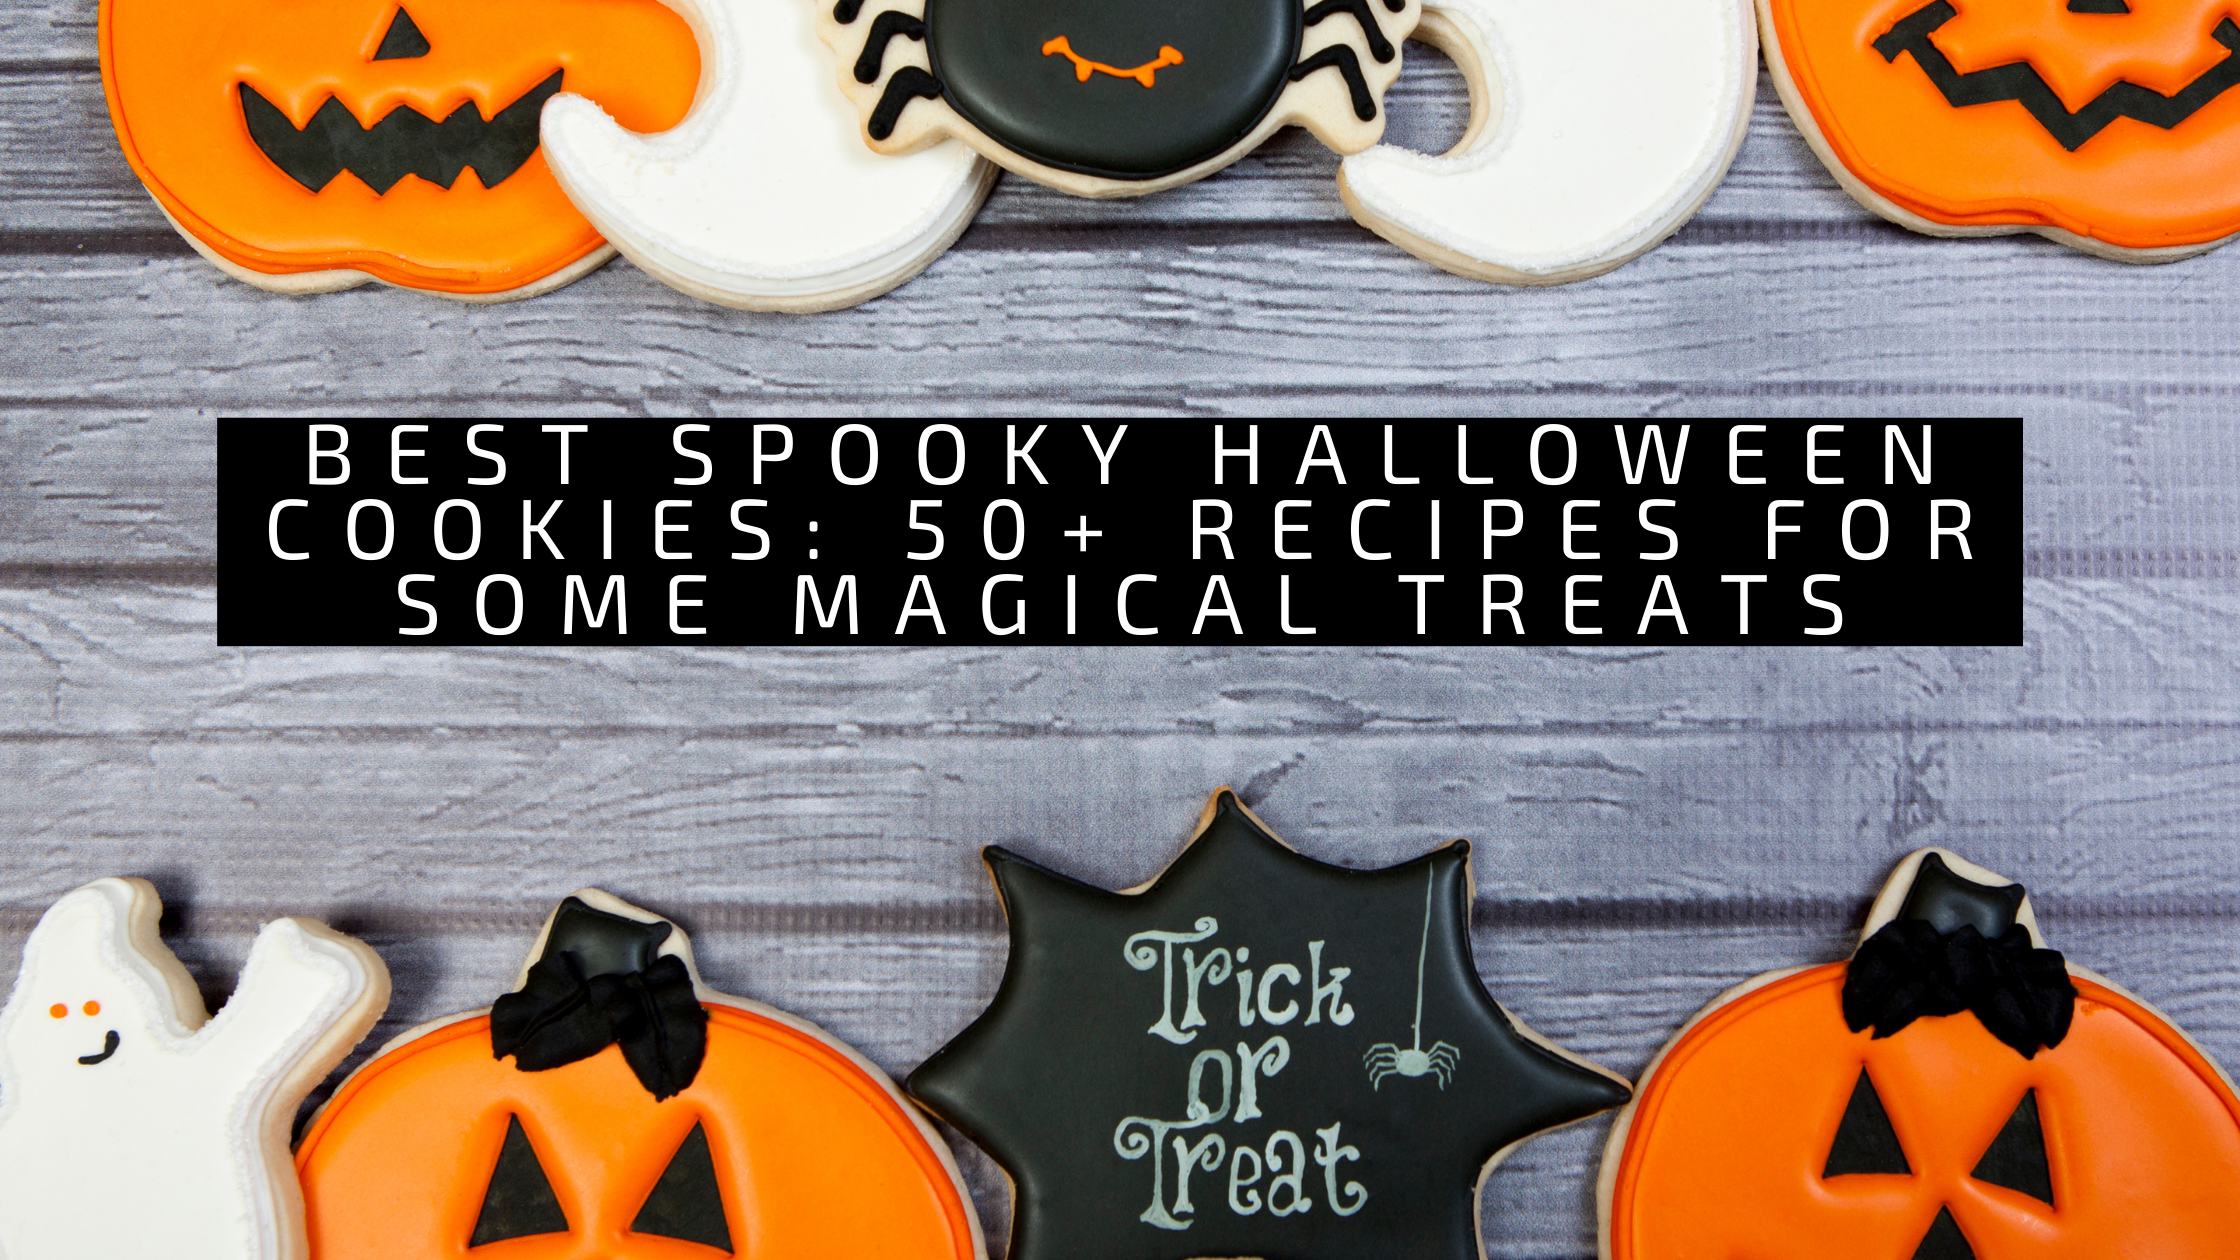 Best Spooky Halloween Cookies: 50+ Recipes for Some Magical Treats 33